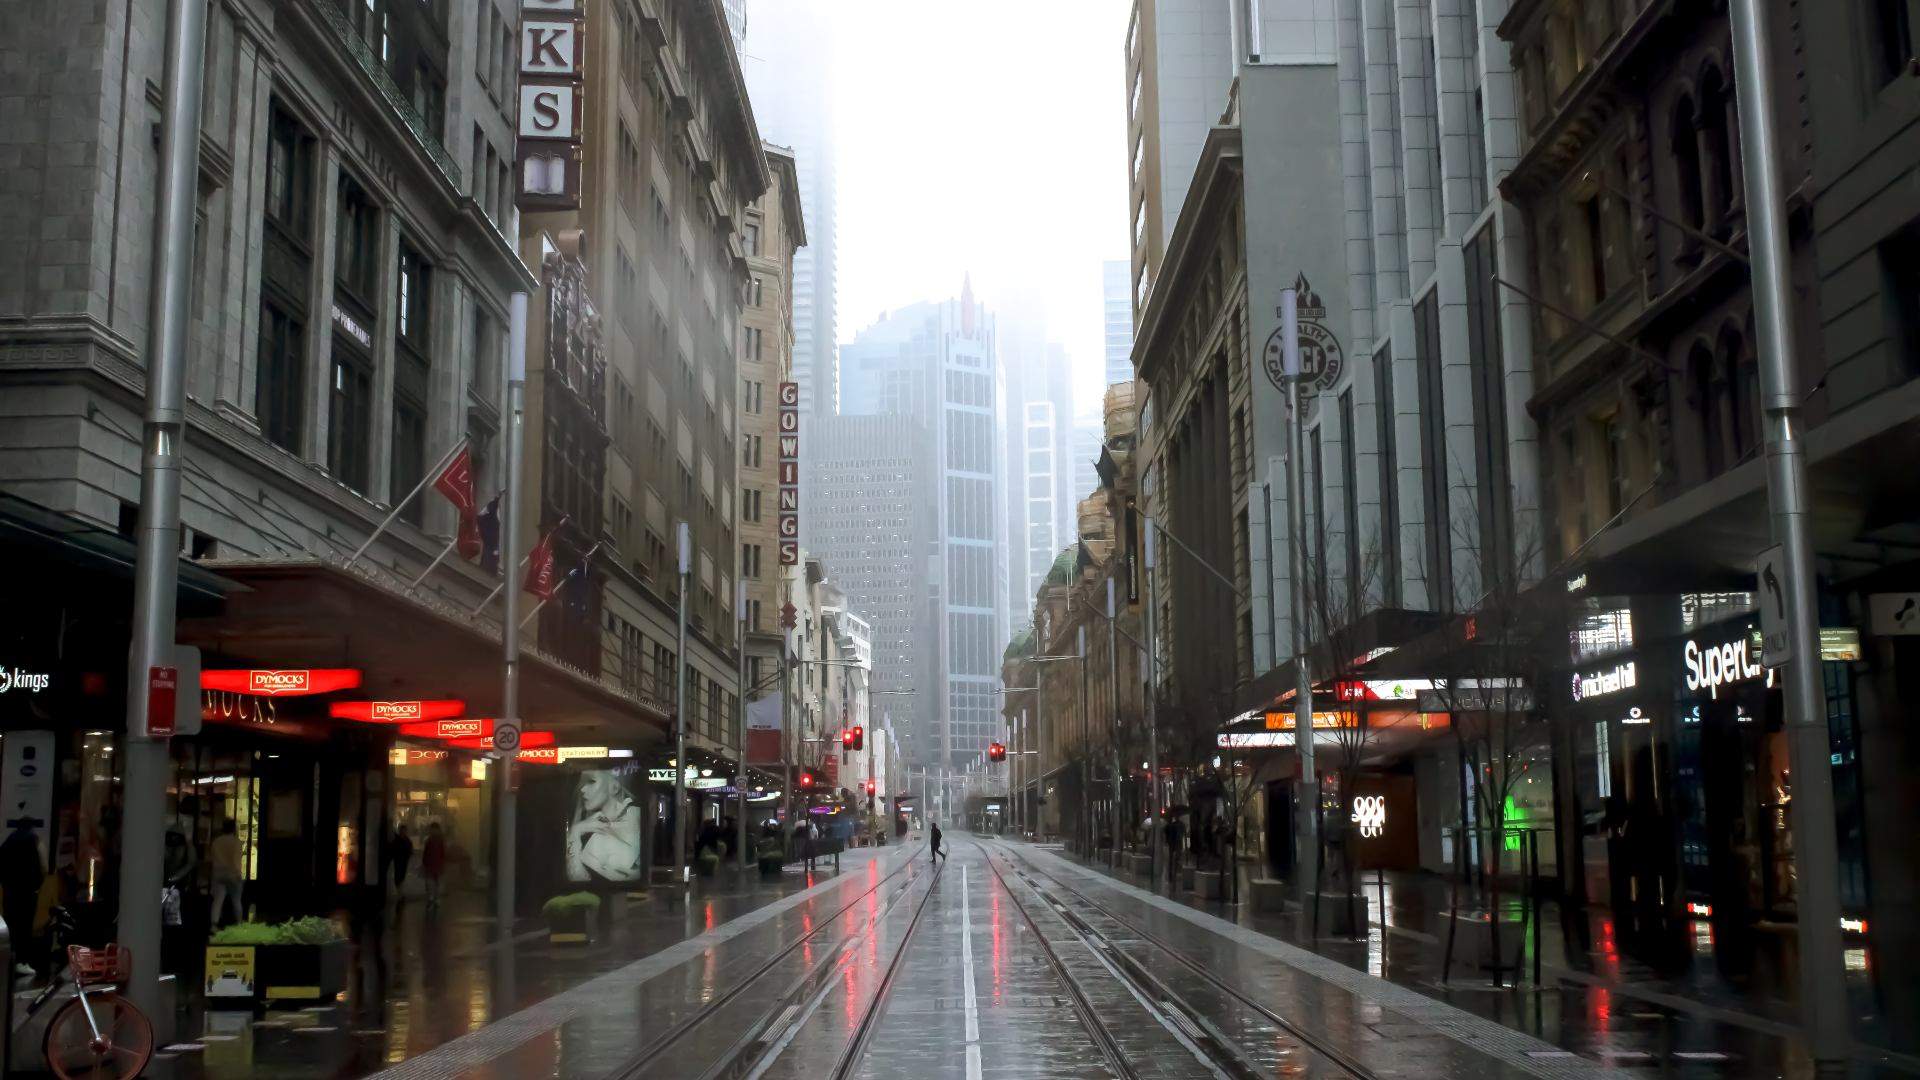 Wet Weather Is Sticking Around on Australia's East Coast with Possible Storms and Flooding